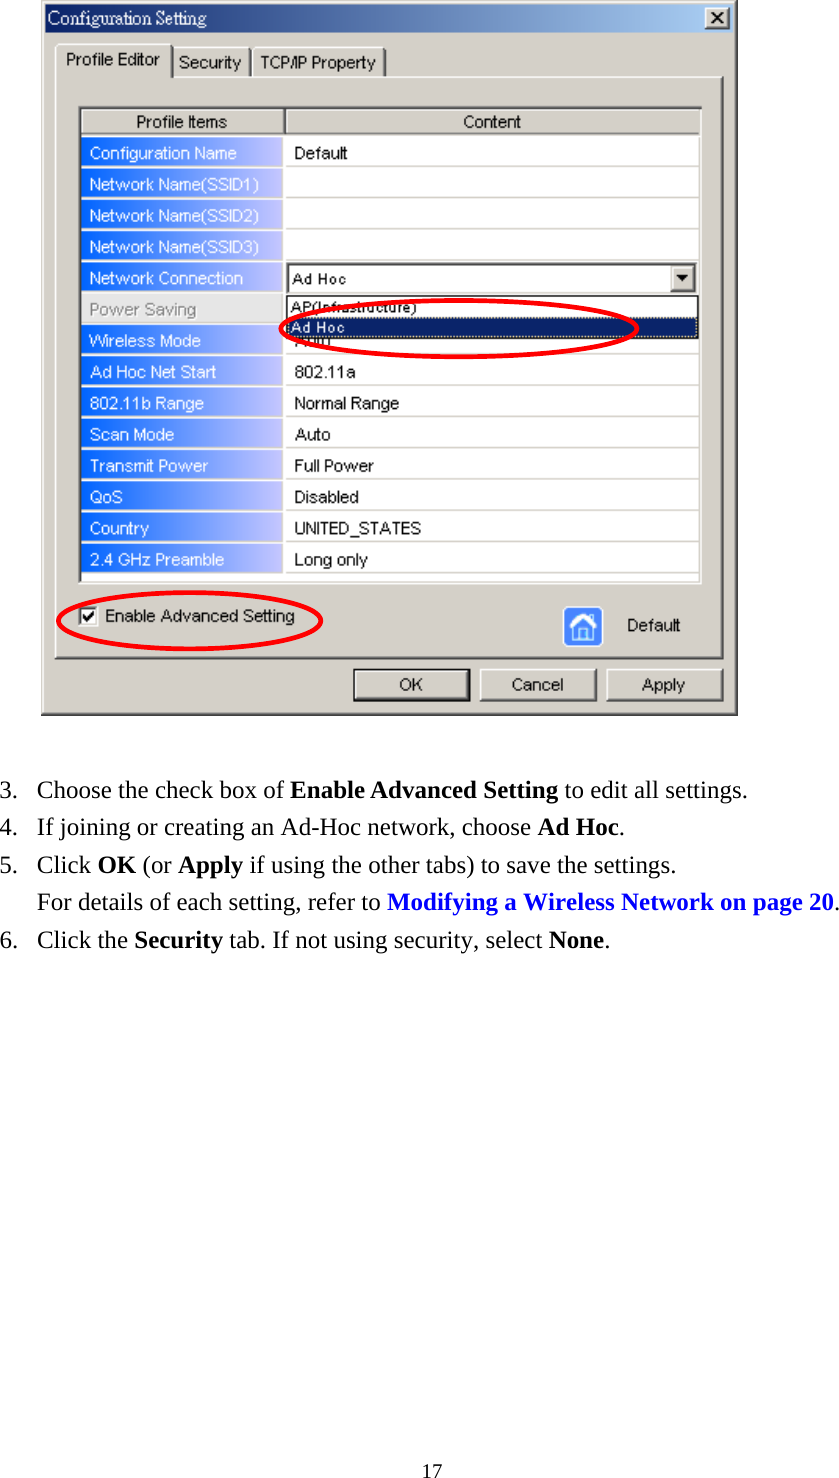  17  3. Choose the check box of Enable Advanced Setting to edit all settings.   4. If joining or creating an Ad-Hoc network, choose Ad Hoc. 5. Click OK (or Apply if using the other tabs) to save the settings. For details of each setting, refer to Modifying a Wireless Network on page 20. 6. Click the Security tab. If not using security, select None. 